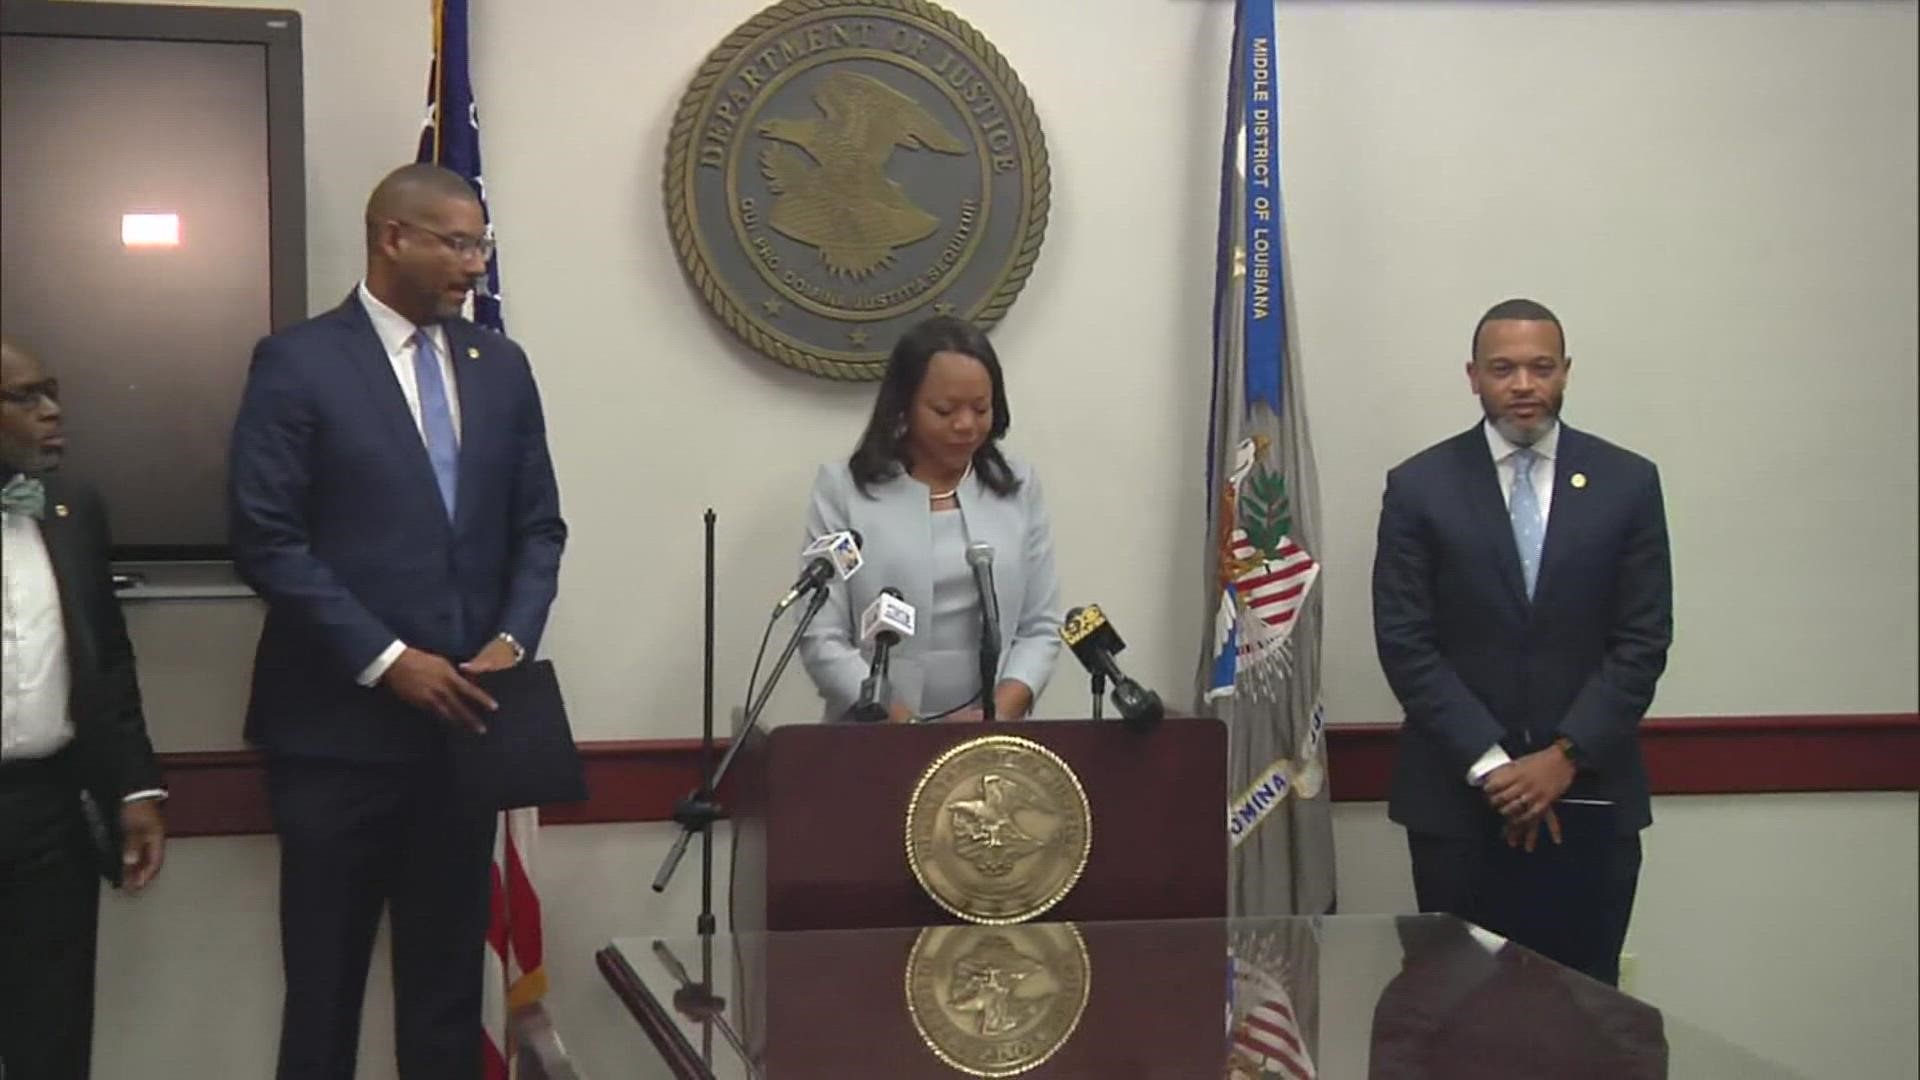 The Department of Justice held a press conference to announce an investigation into State Police.